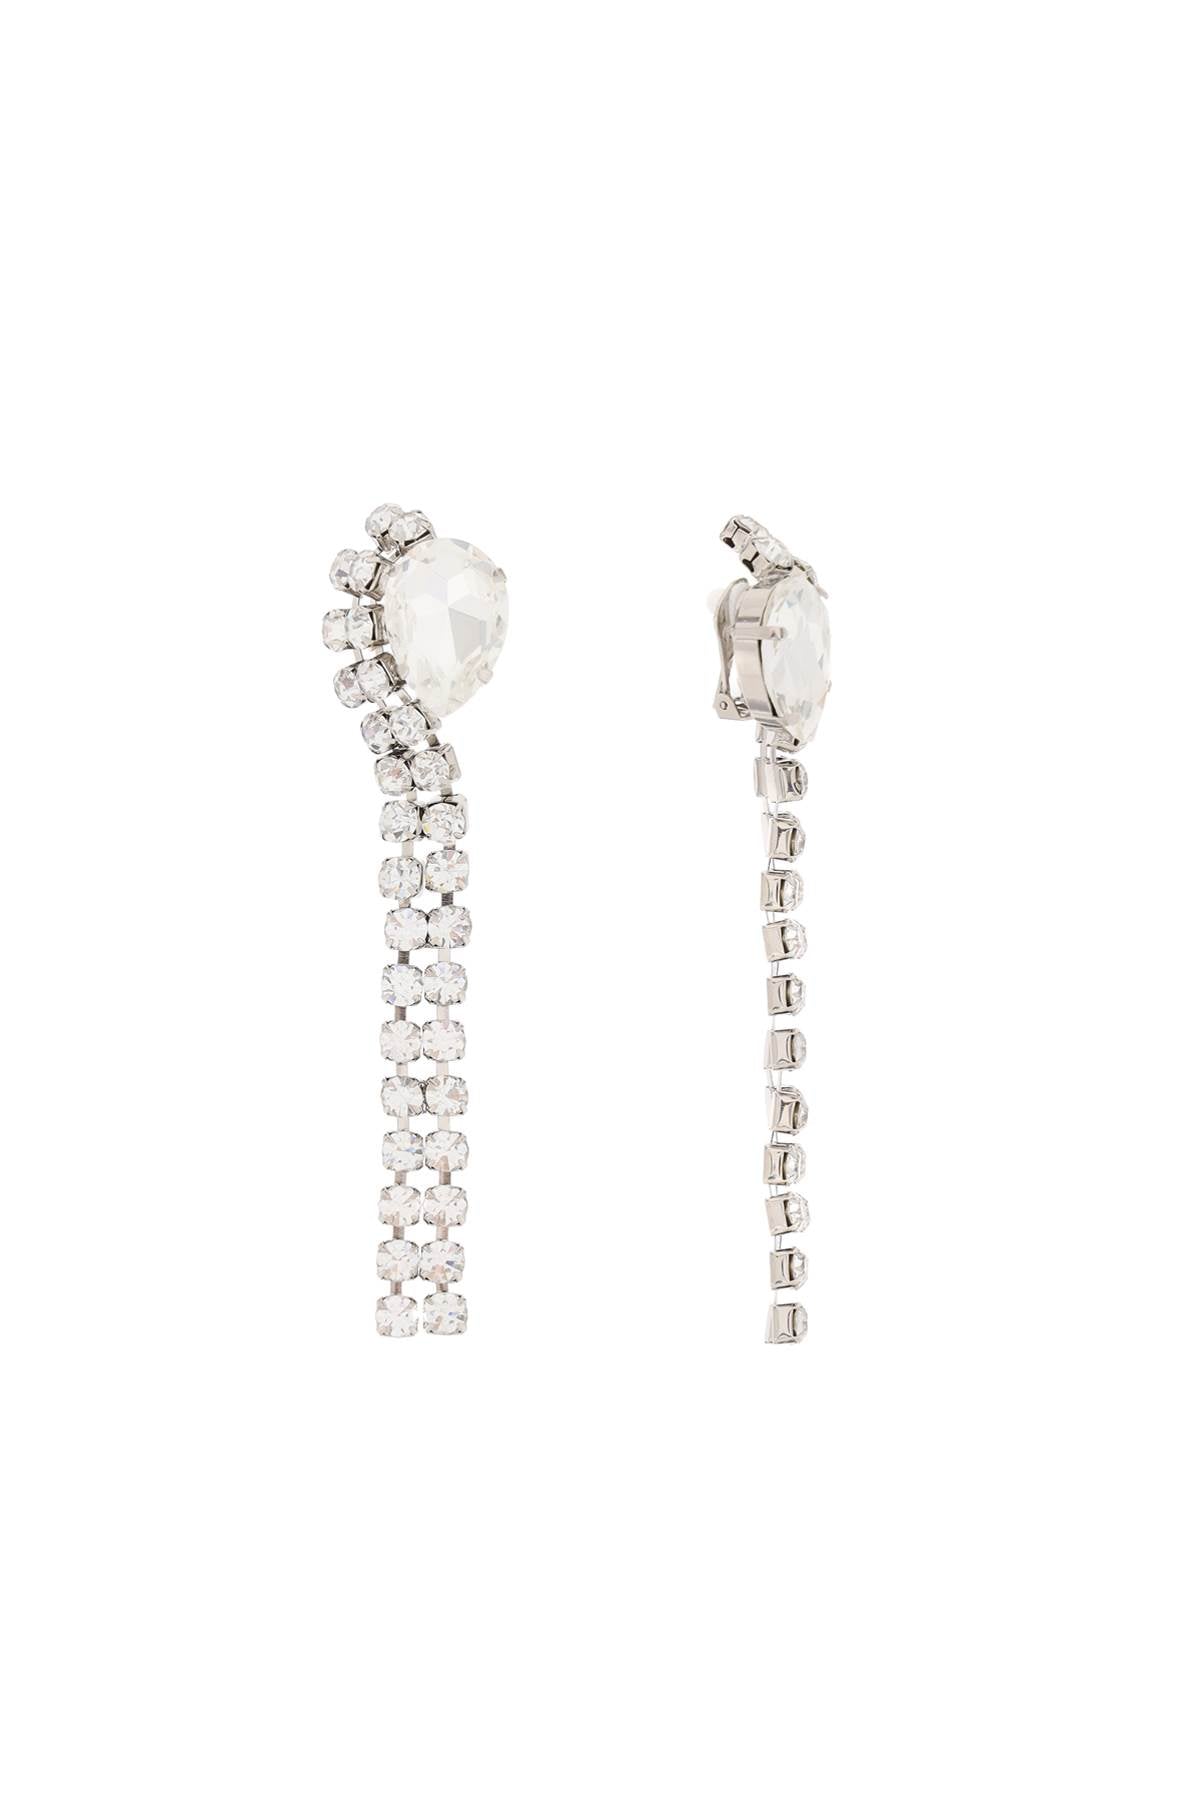 Alexander mcqueen stud earrings with faceted stone-0